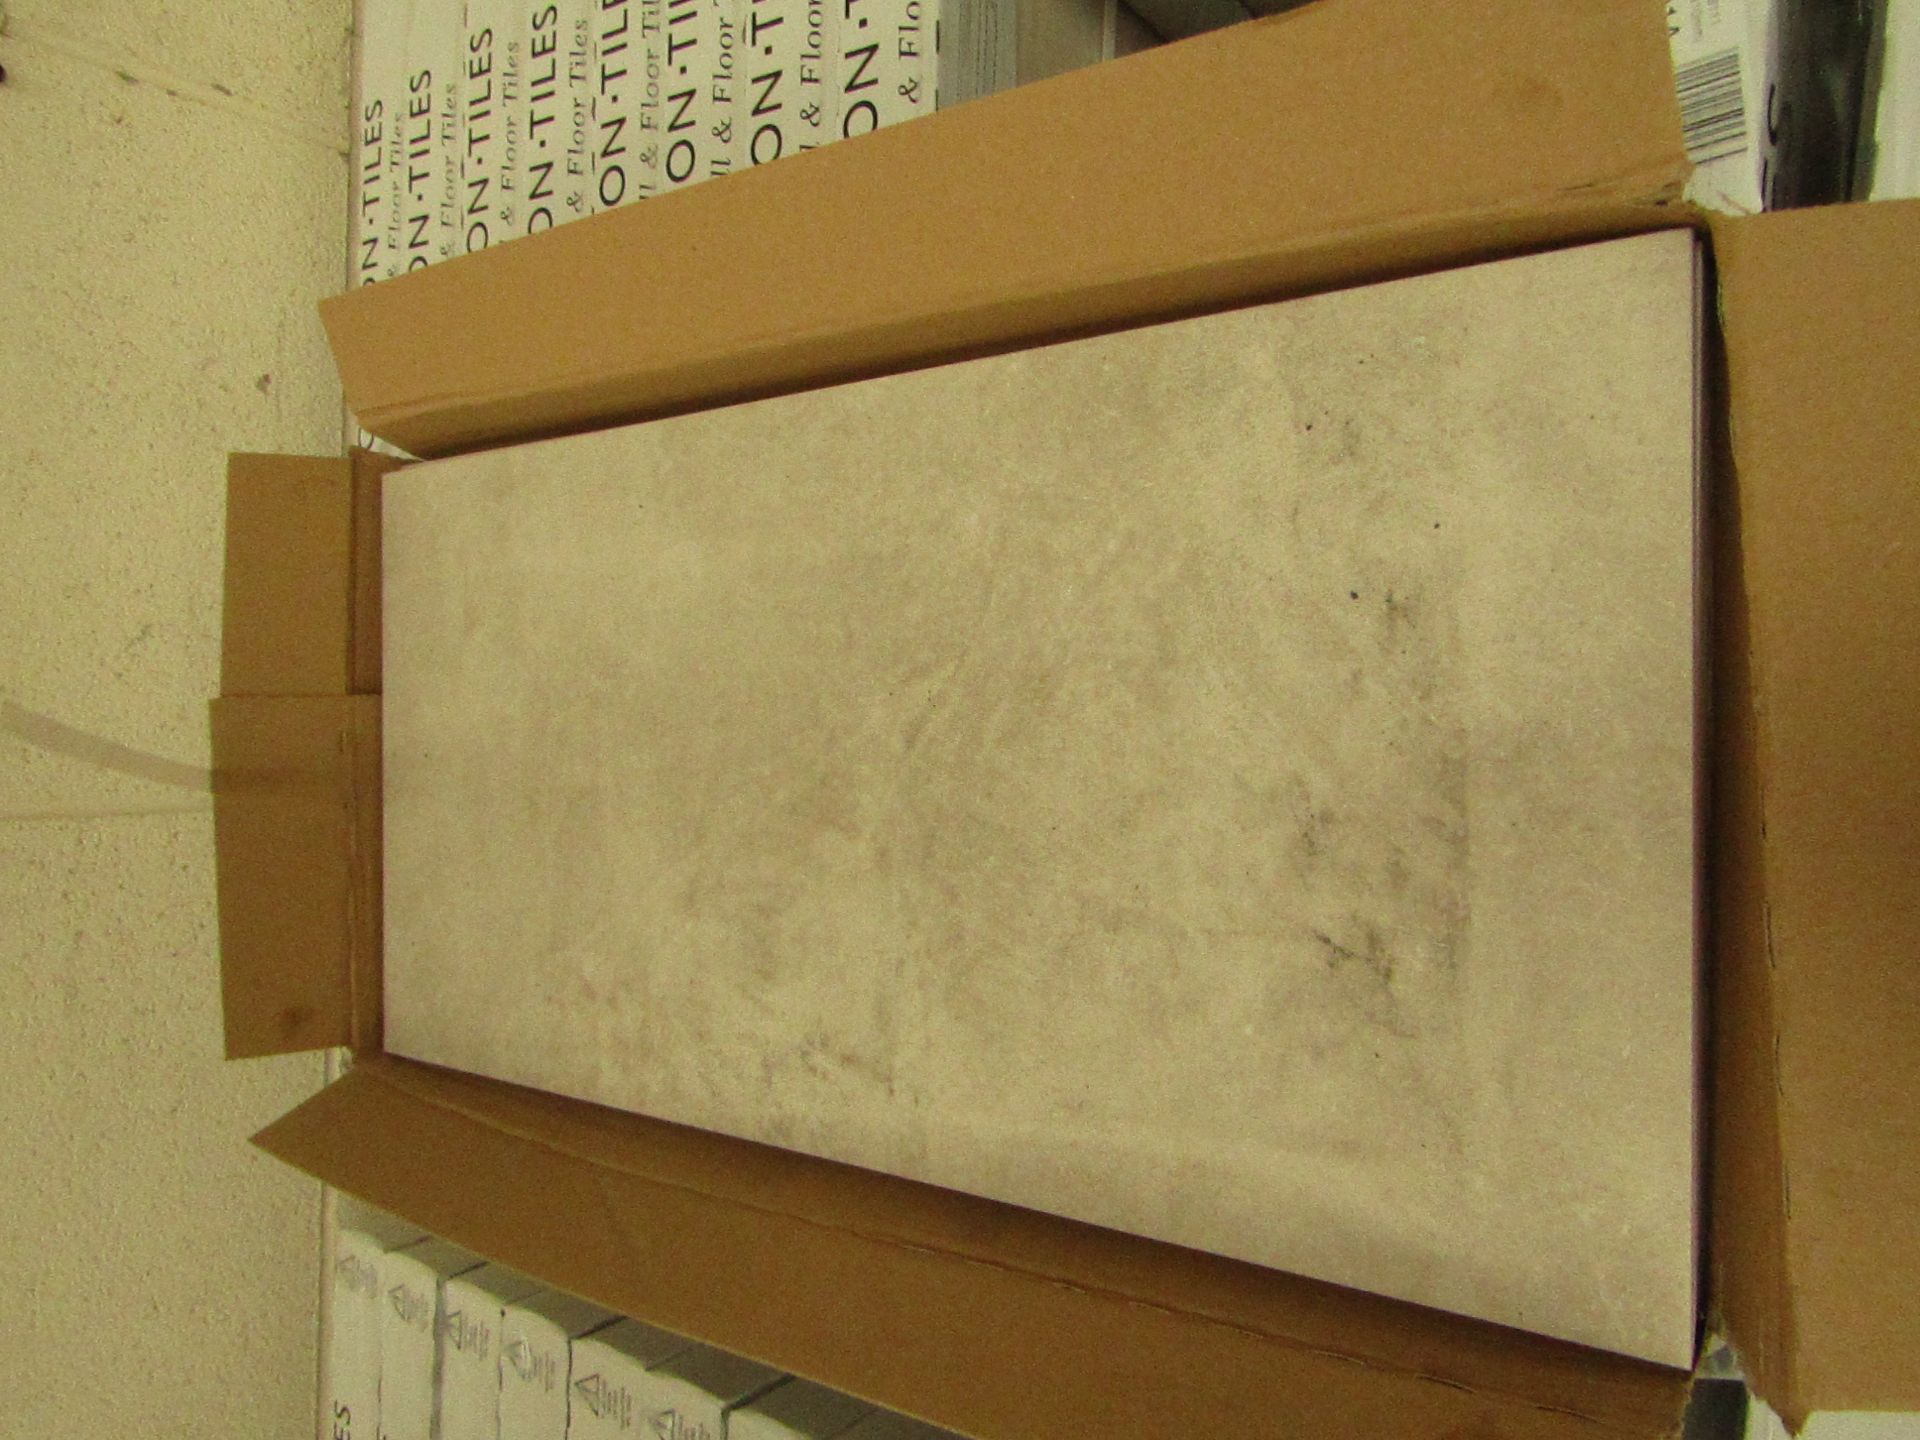 10x Packs of 5 Cambridge Old stone Textured 300x600 wall and floor tiles by Johnsons, new. The RRP